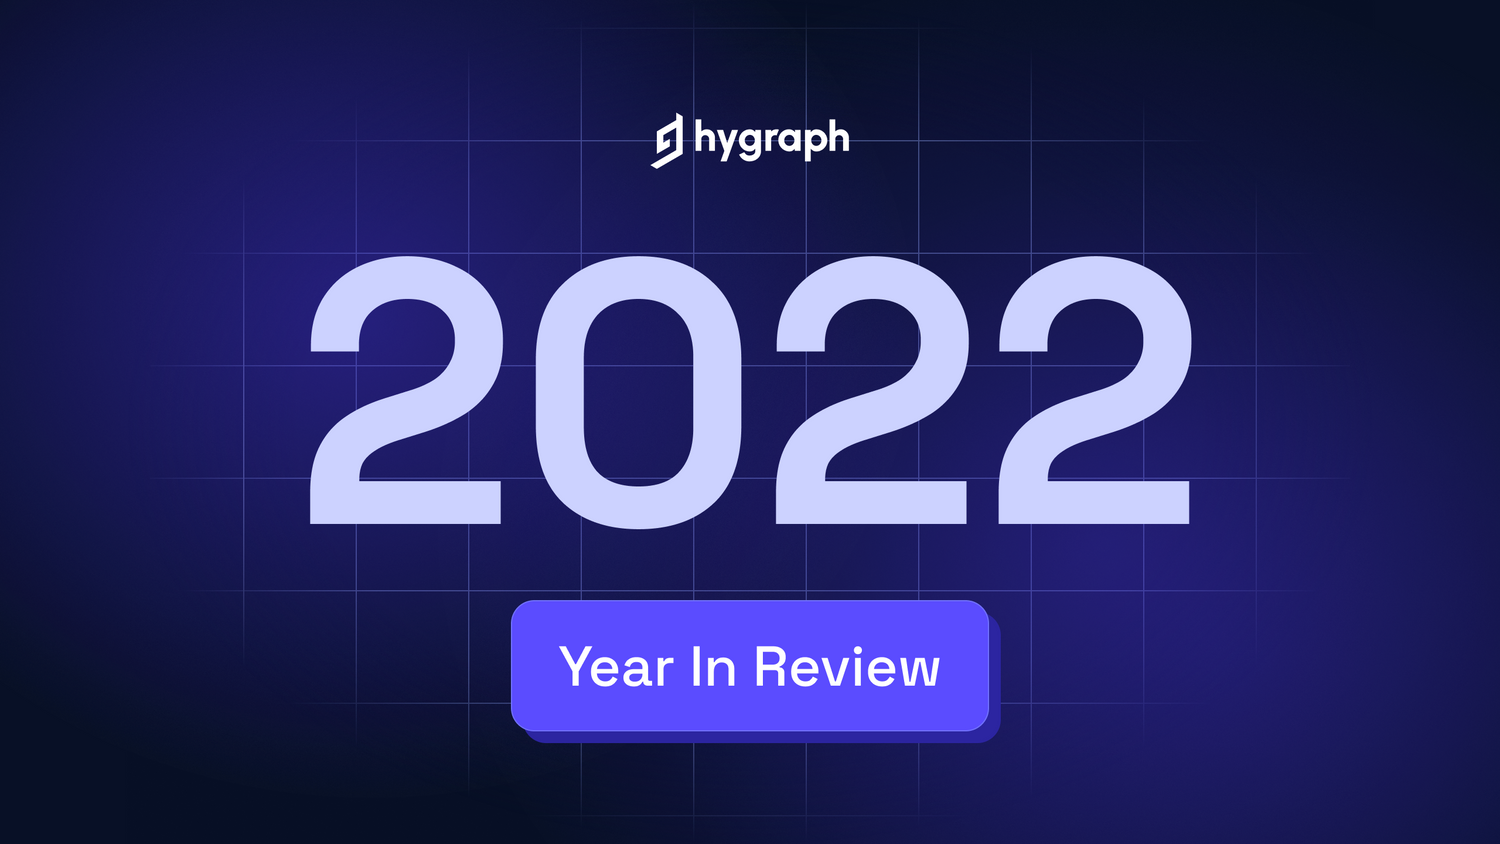 A lookback on the achievements and highlights of Hygraph in 2022